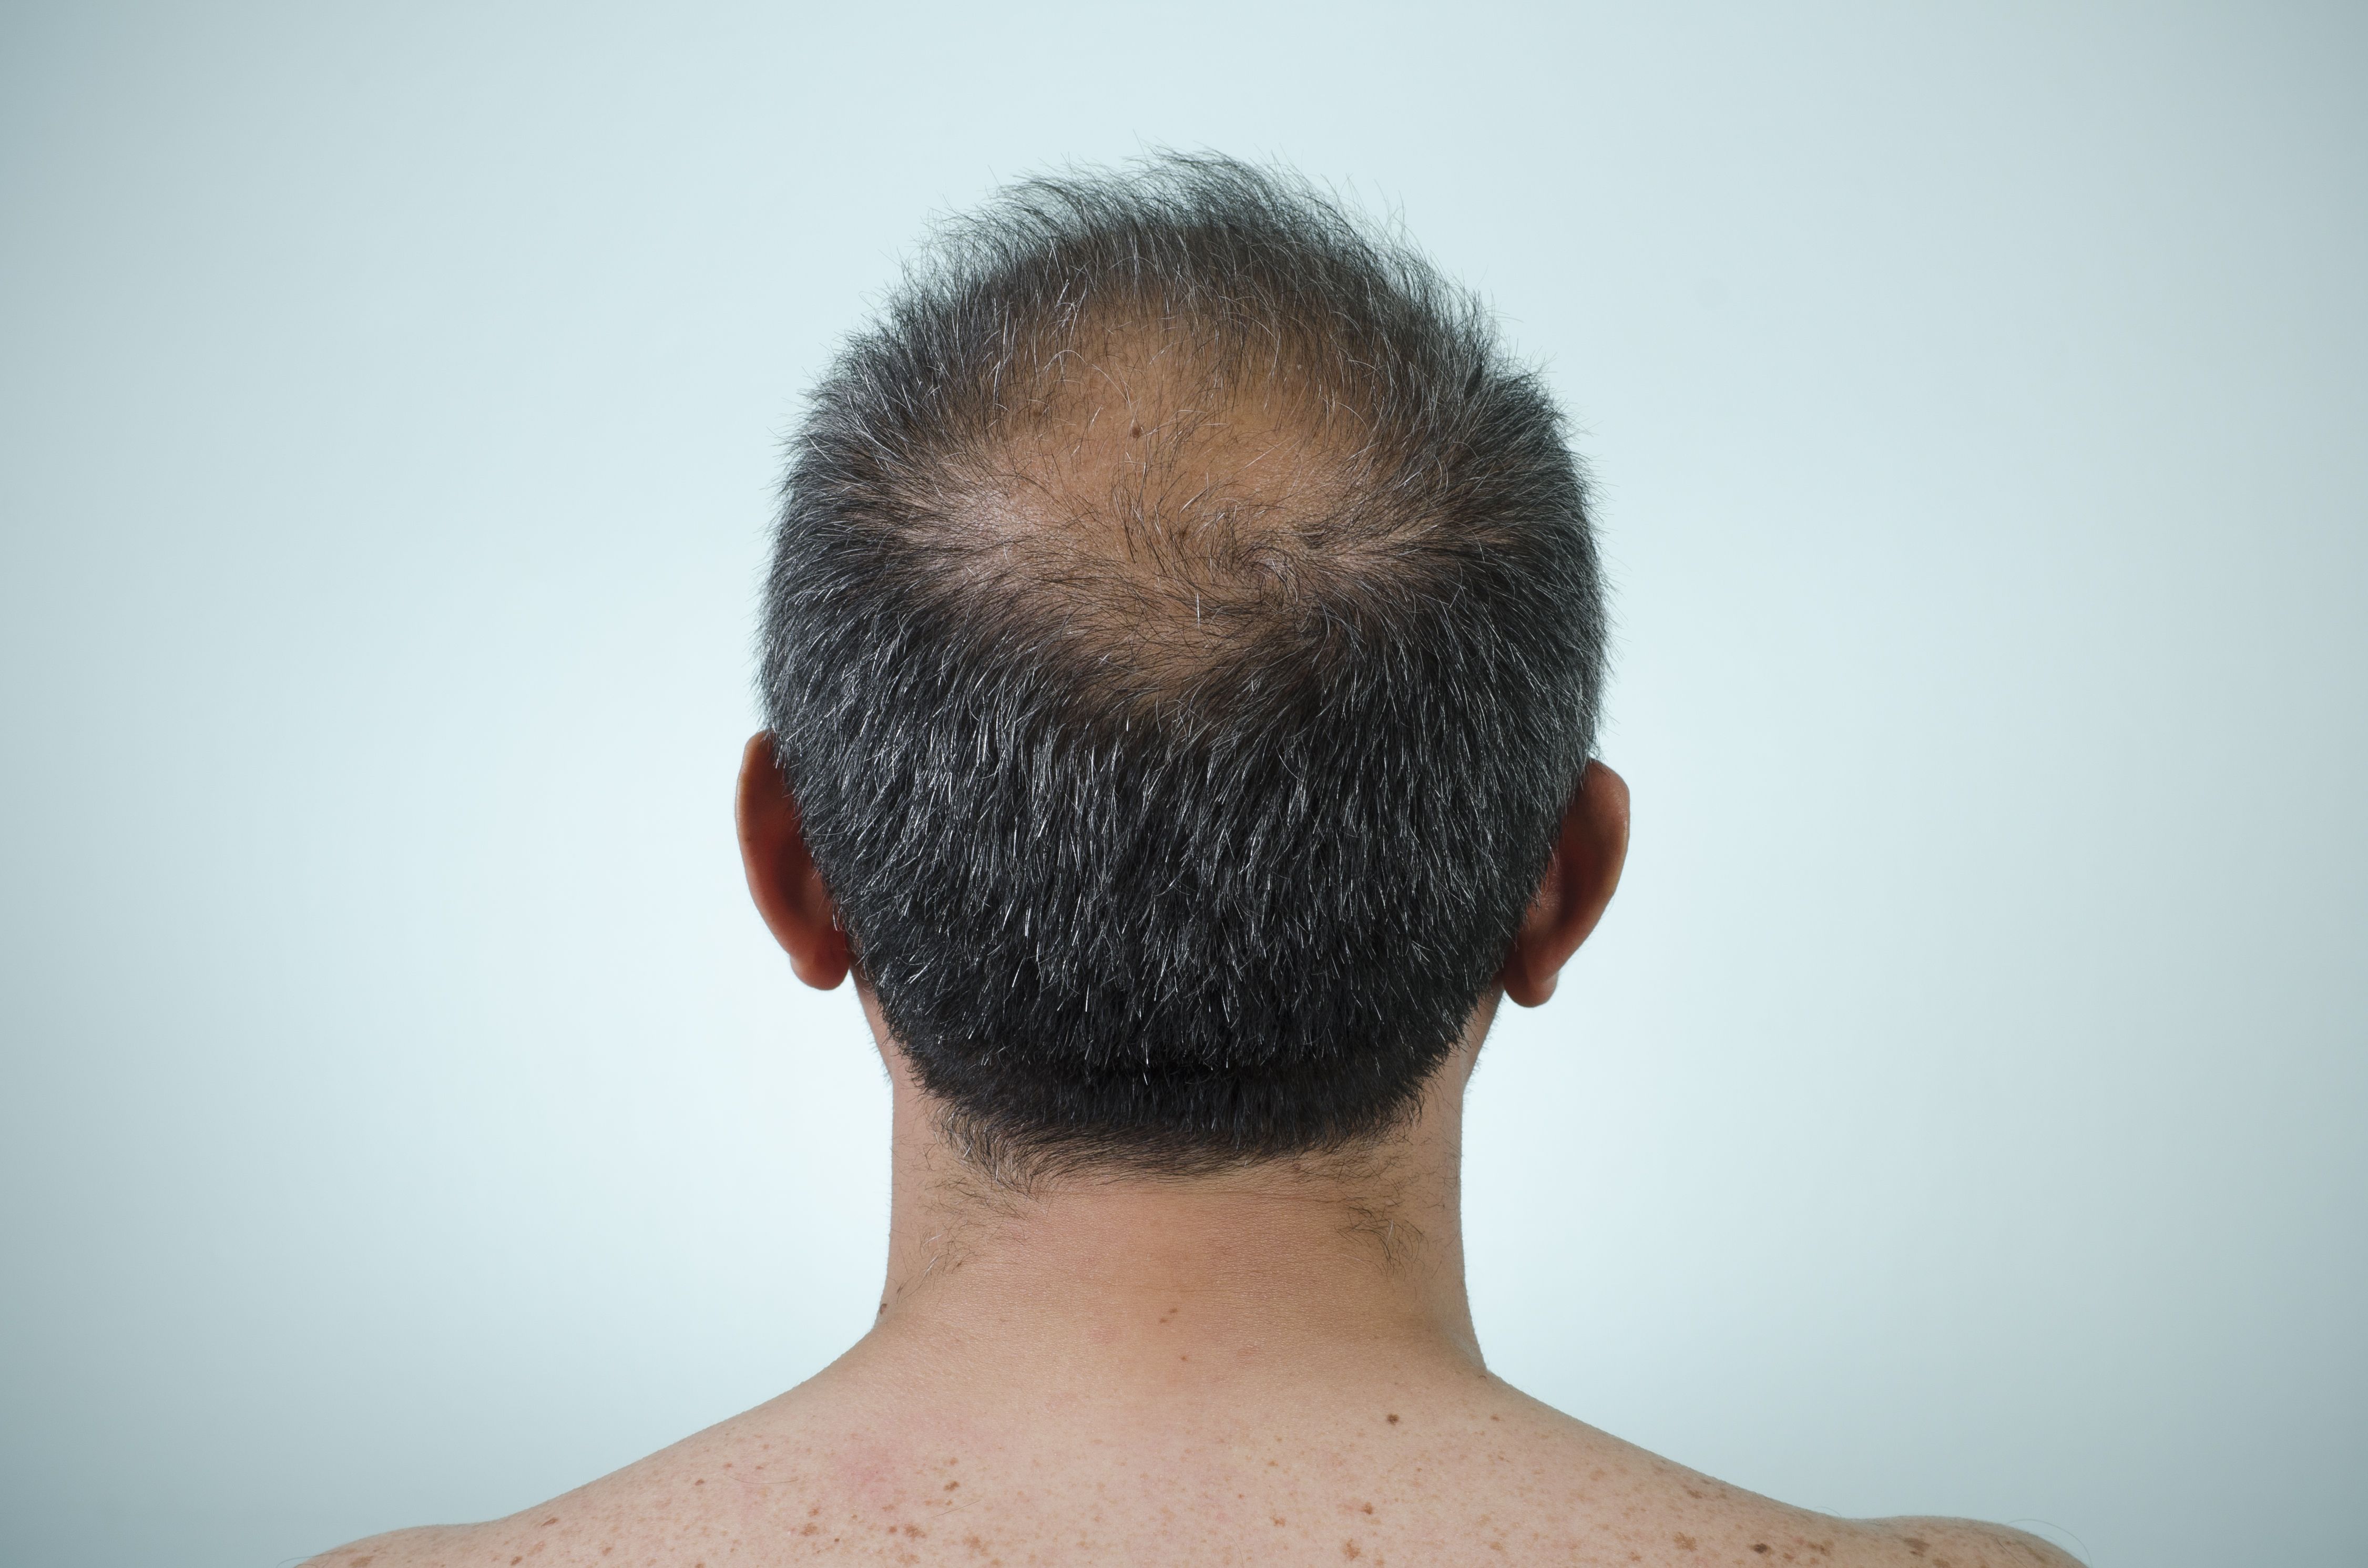 What causes balding in the back of the head?